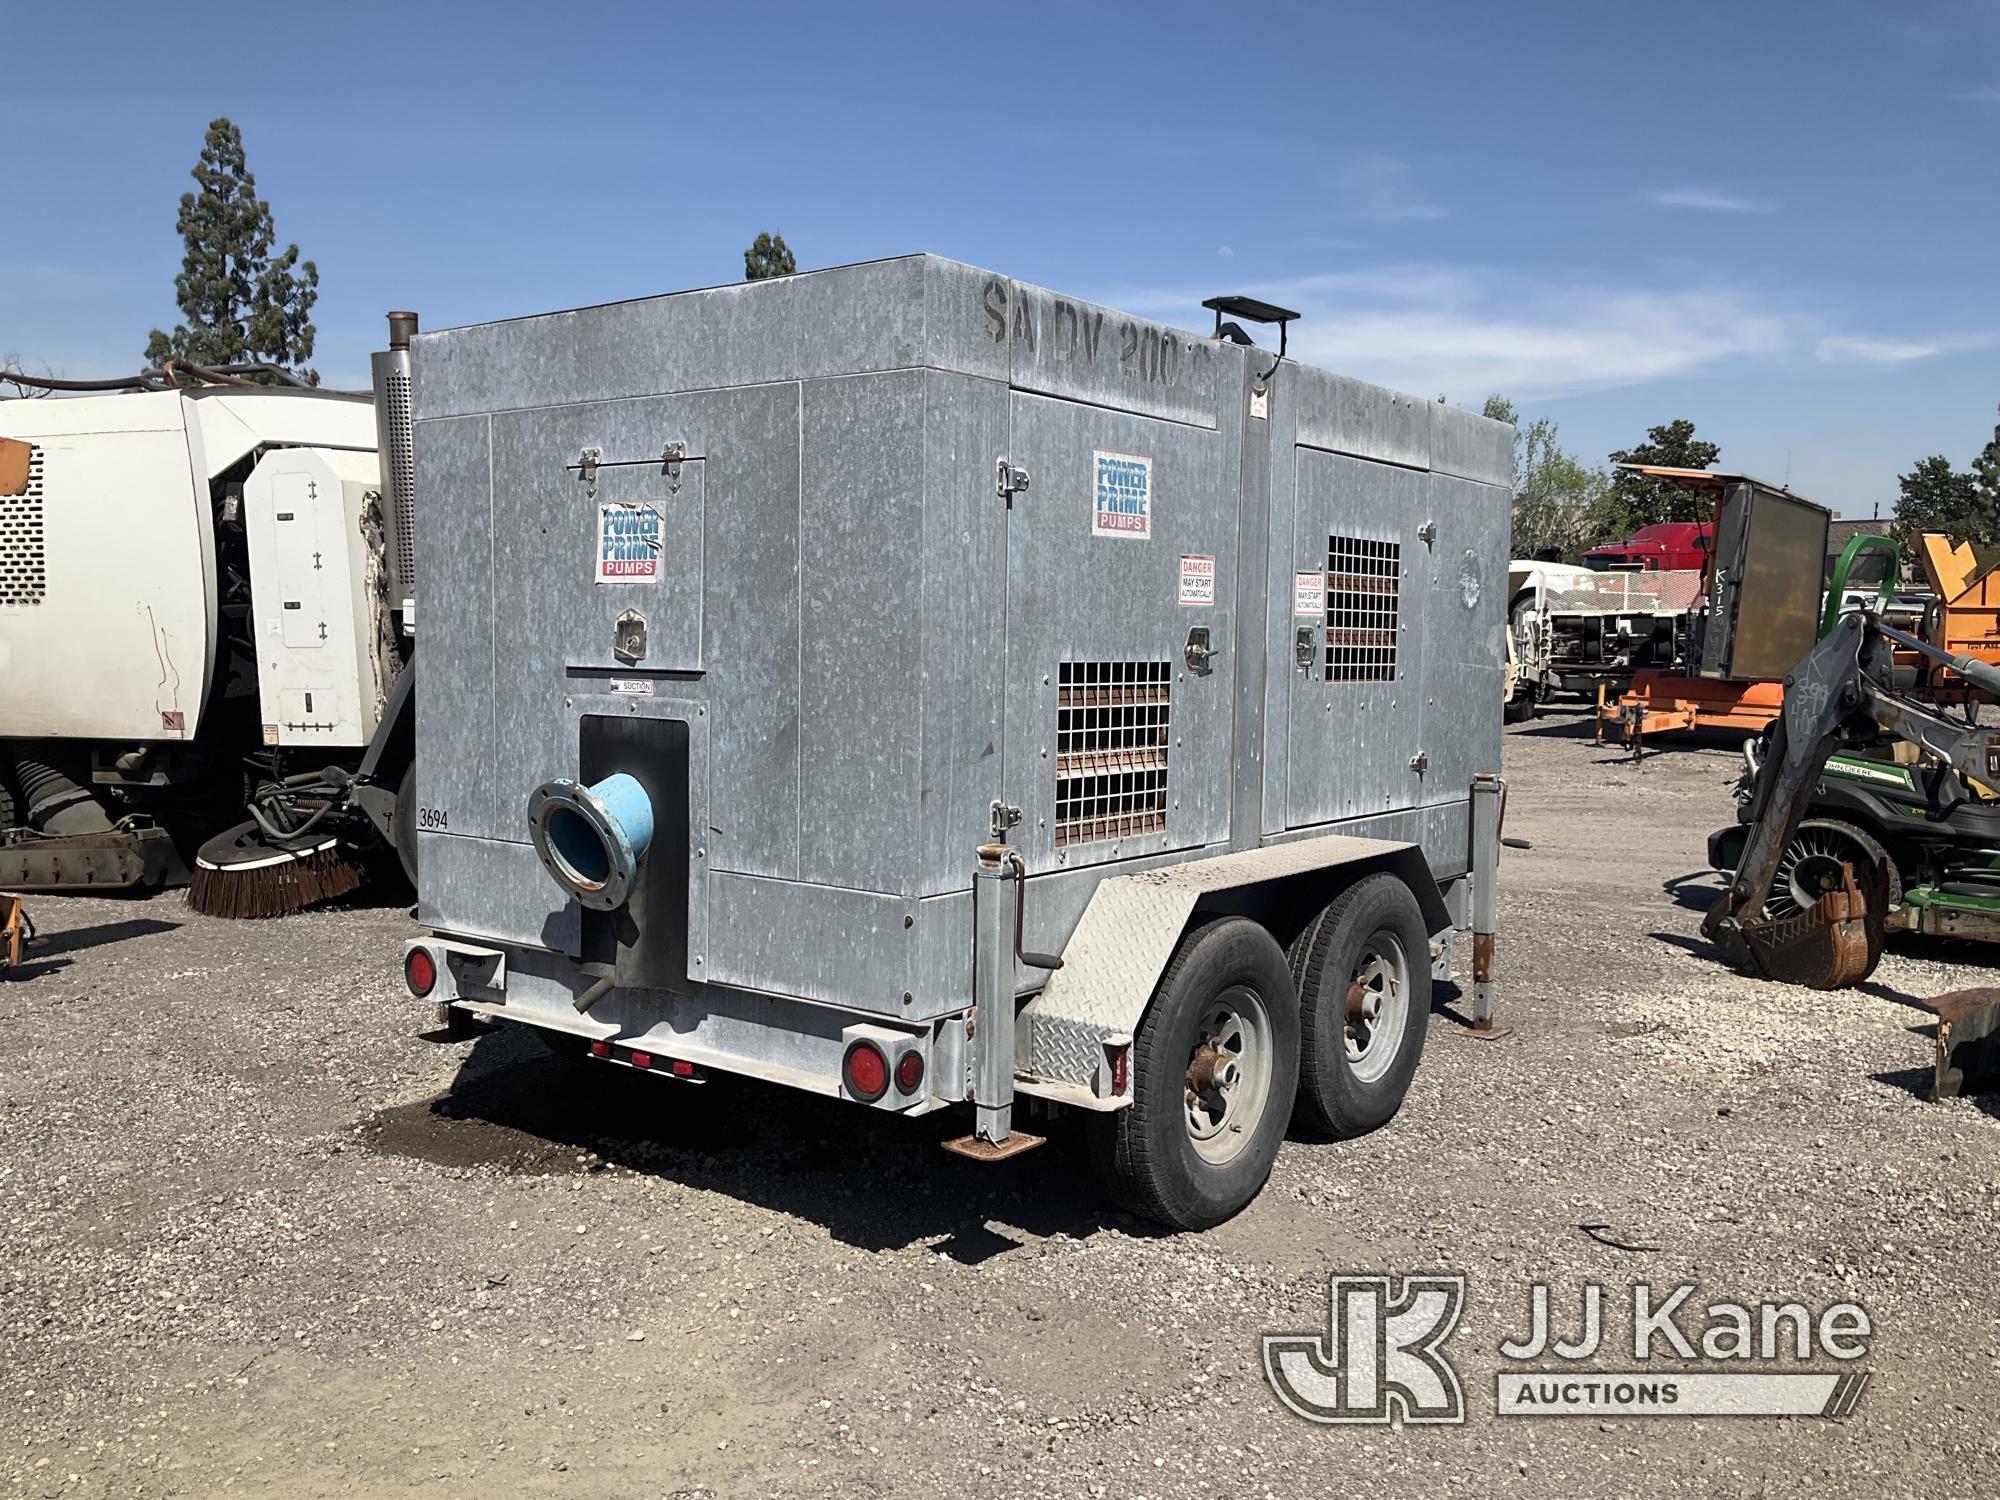 (Jurupa Valley, CA) 2007 Portable Pump Not Running, Missing Key, True Hours Unknown, Application for